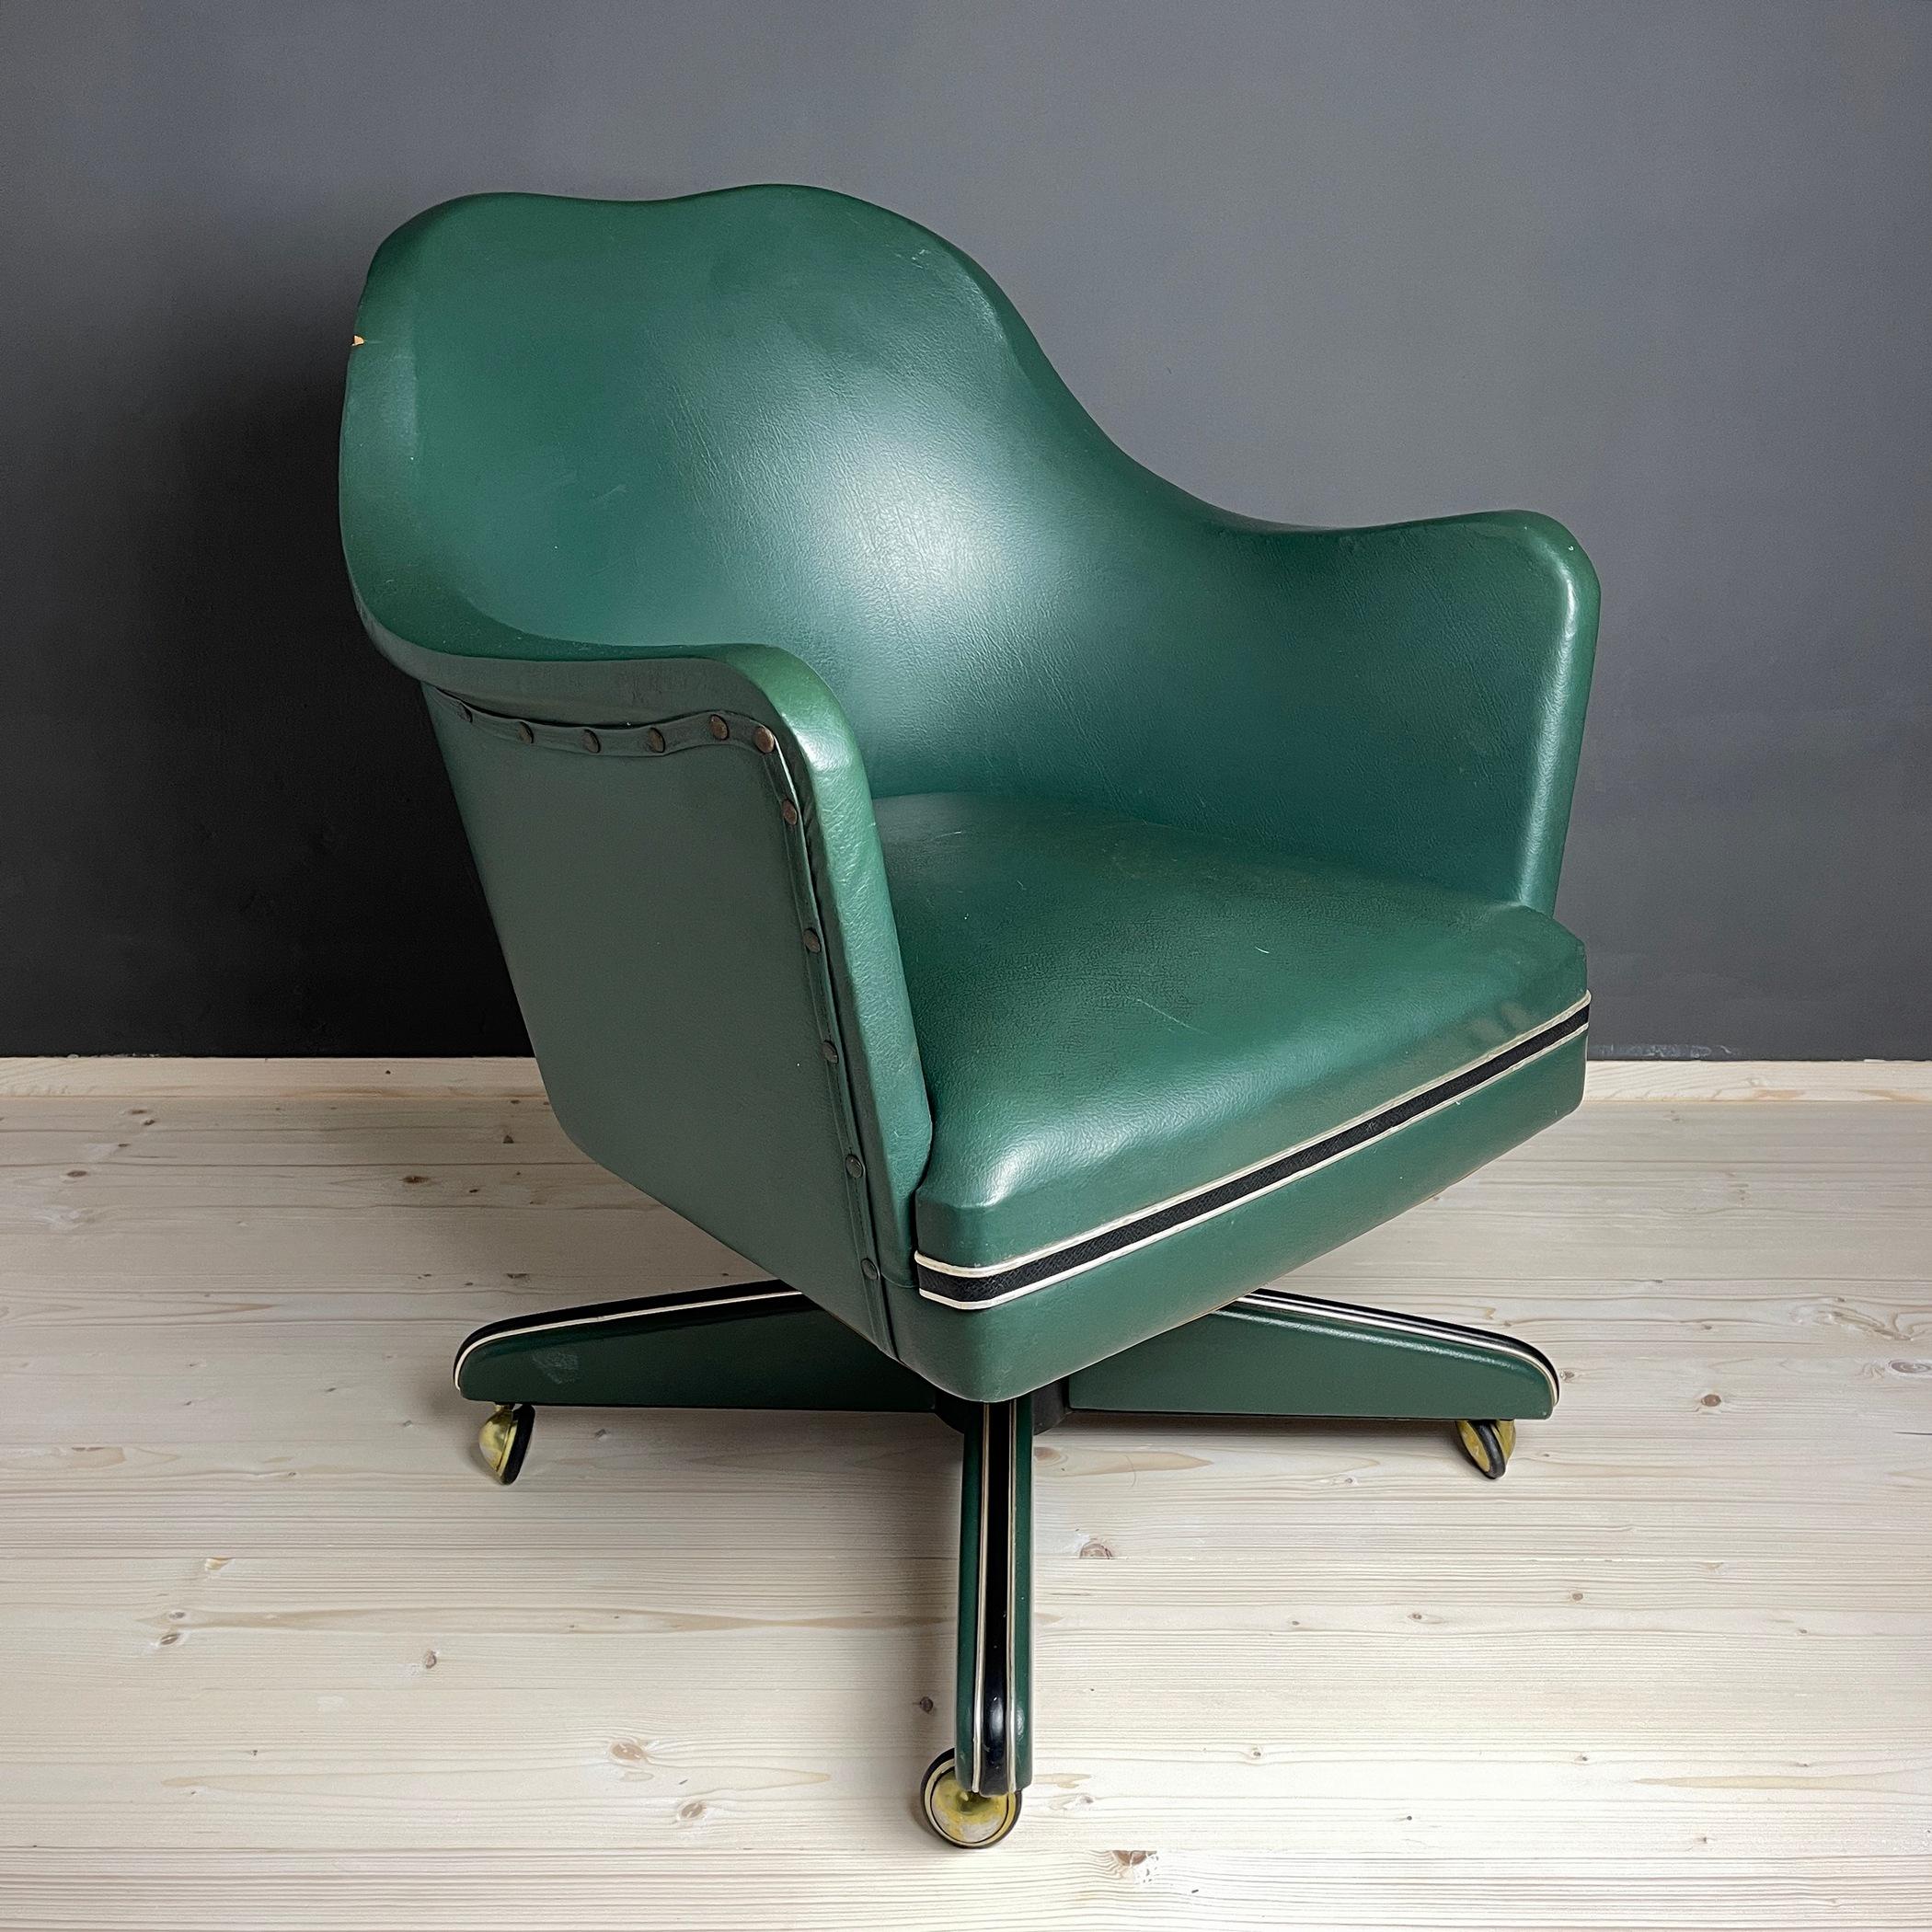 Midcentury swivel green office chair by Umberto Mascagni made in Italy in the 1950s. The vinyl used to create this armchair by Umberto Mascagni was a very popular material in the 1950s. The chair has a simple, tasteful design. This intriguing piece